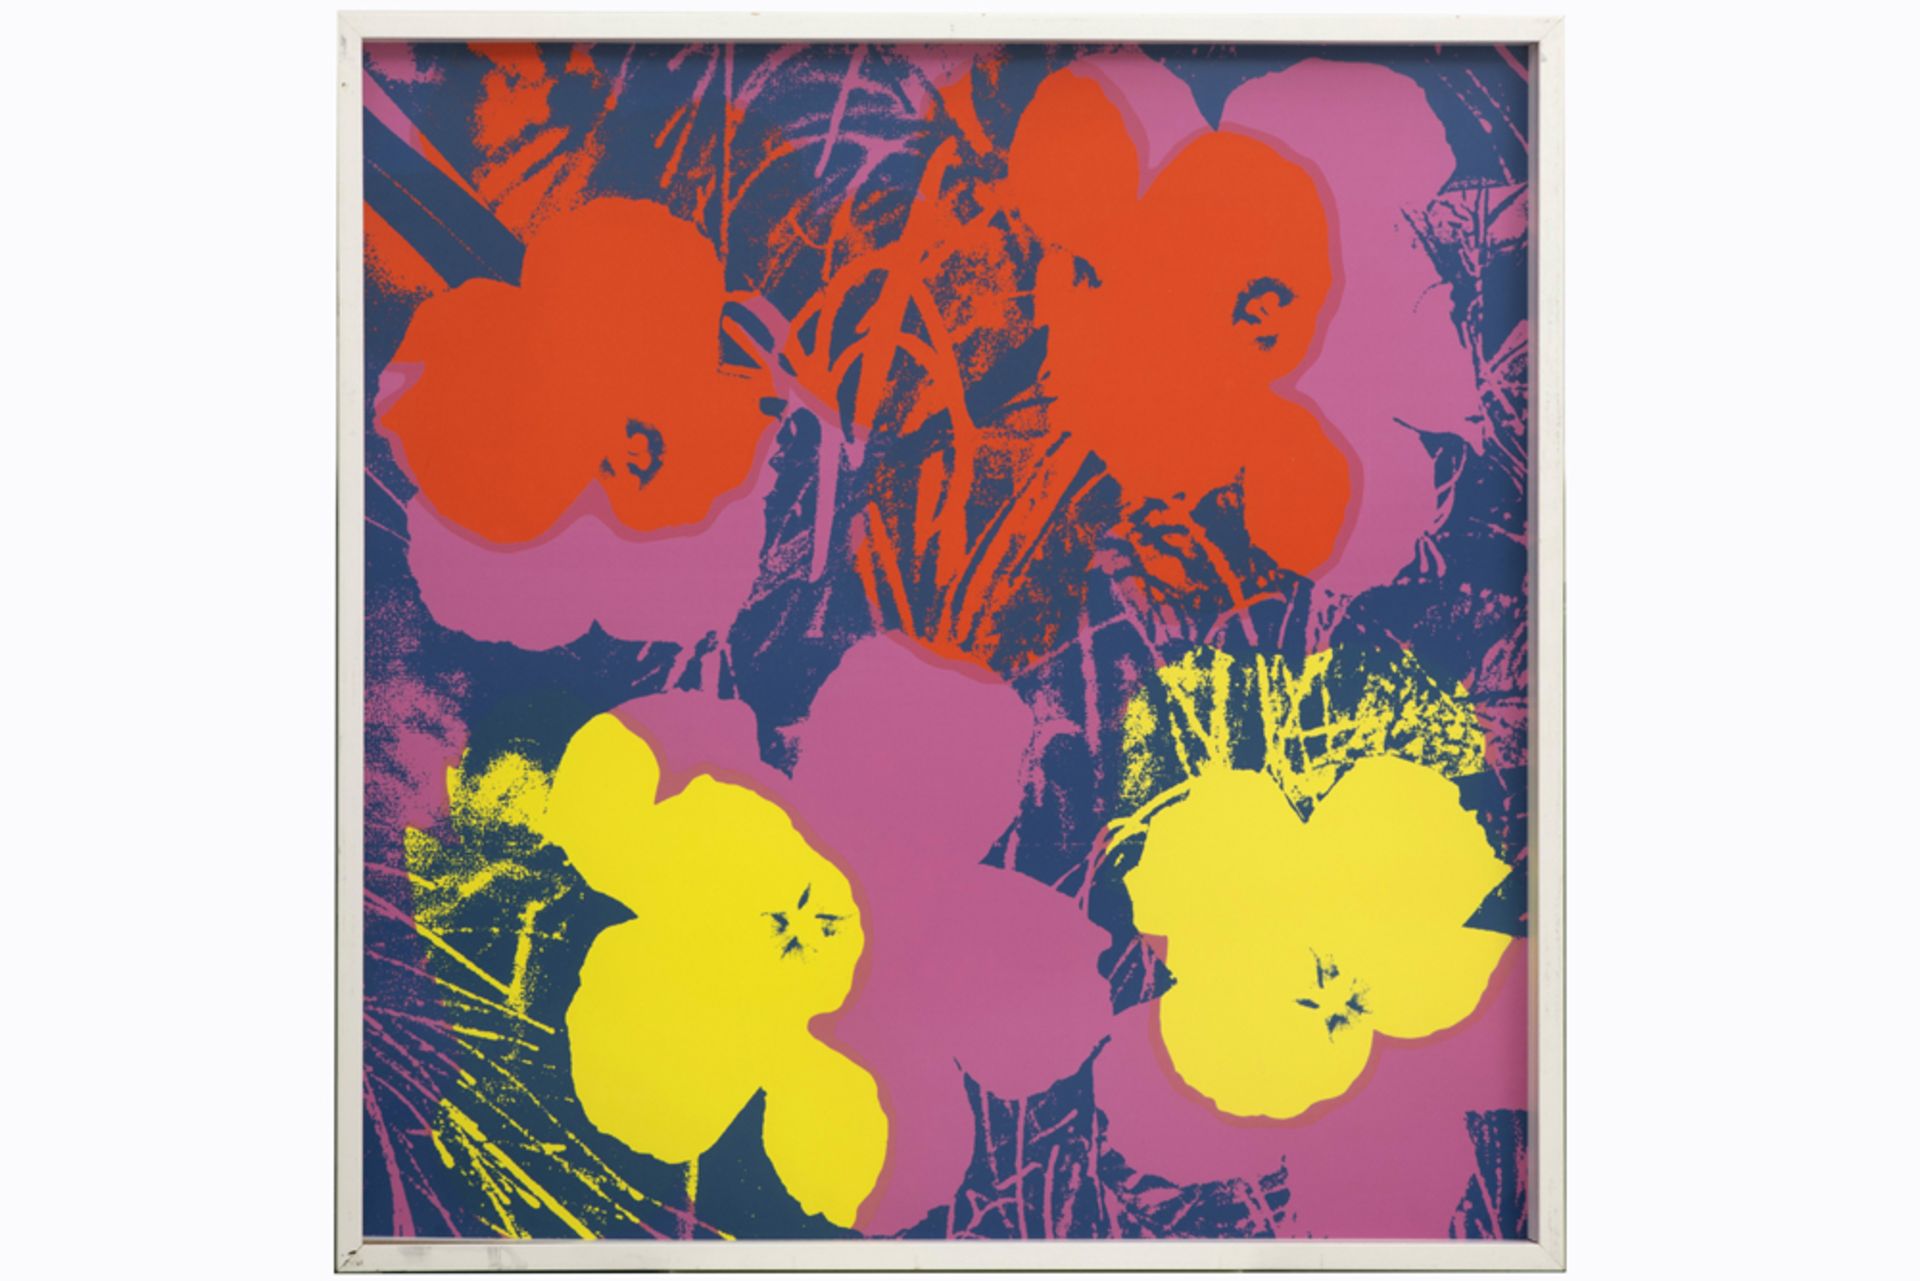 Andy Warhol "Flowers" silkscreen in an Sunday B. Morning edition (of the seventies') with the